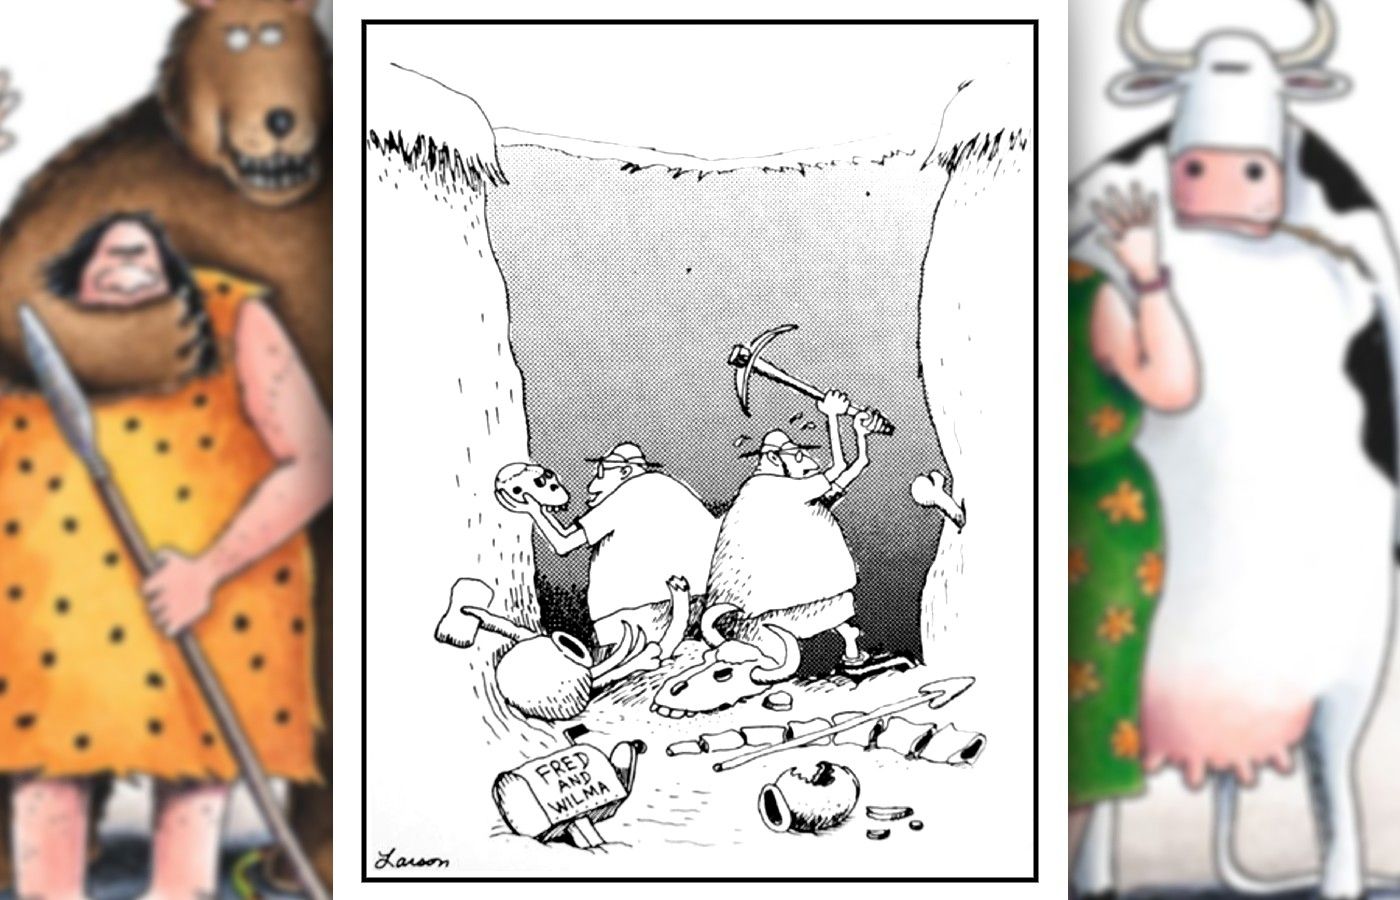 far side comic where archaeologists discover the flintstones' mail box